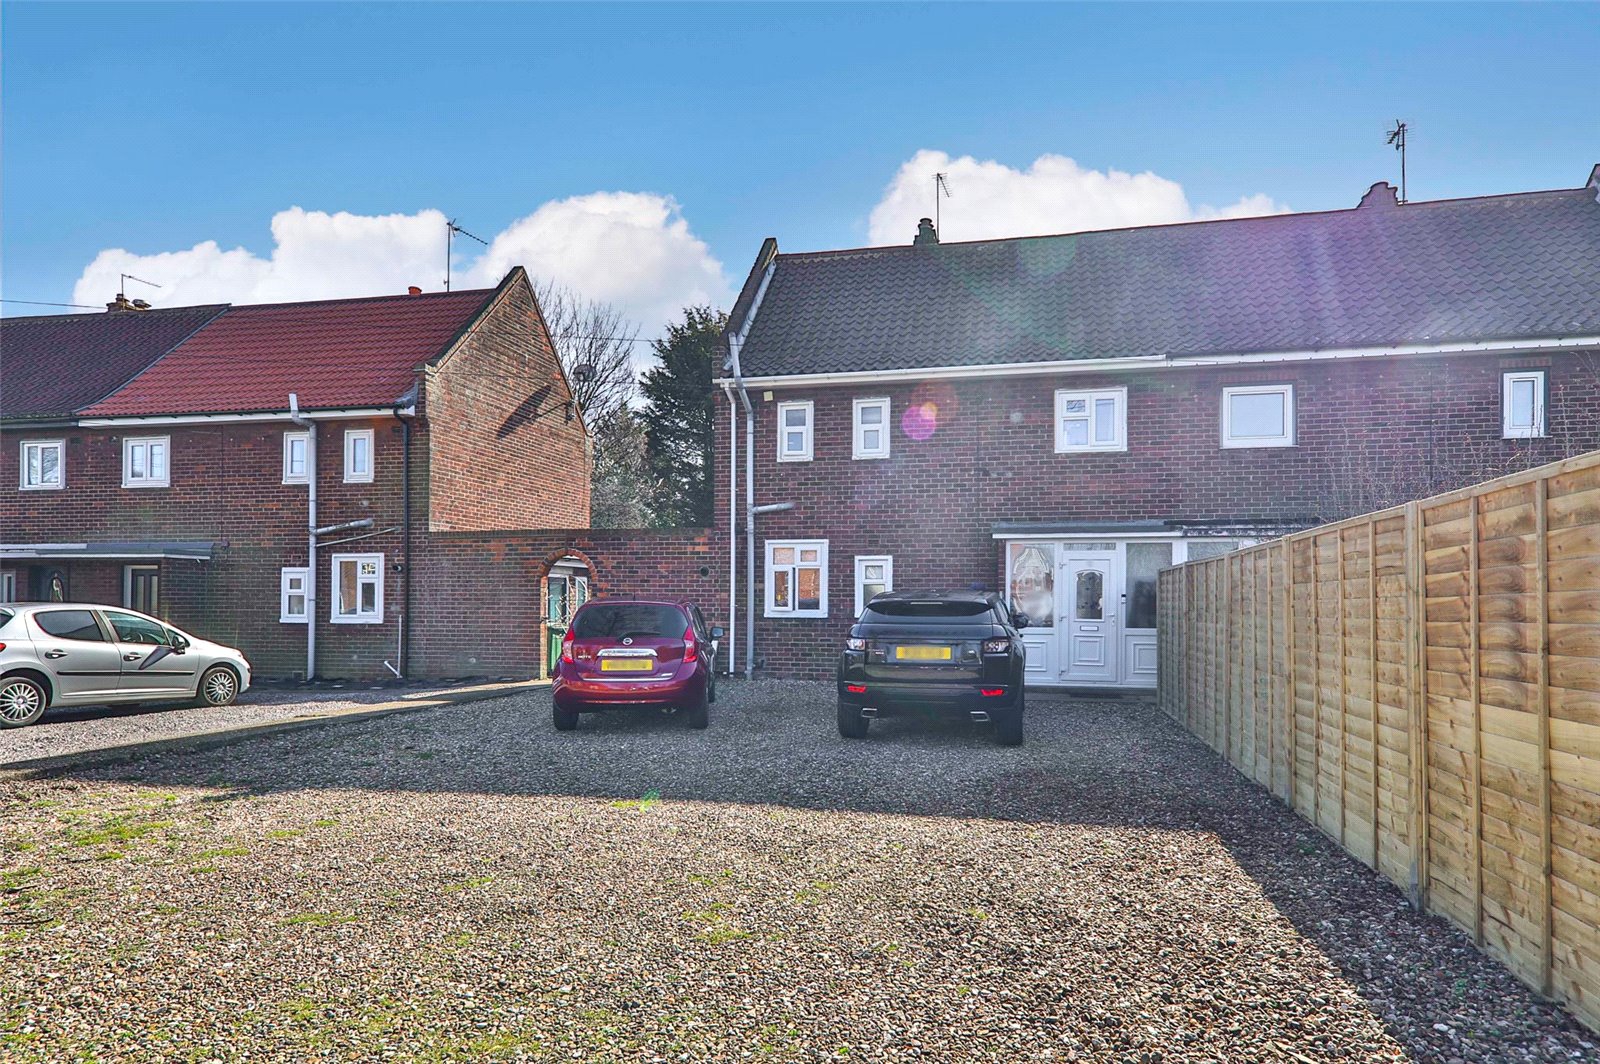 3 bed house for sale in Goths Lane, Beverley 0